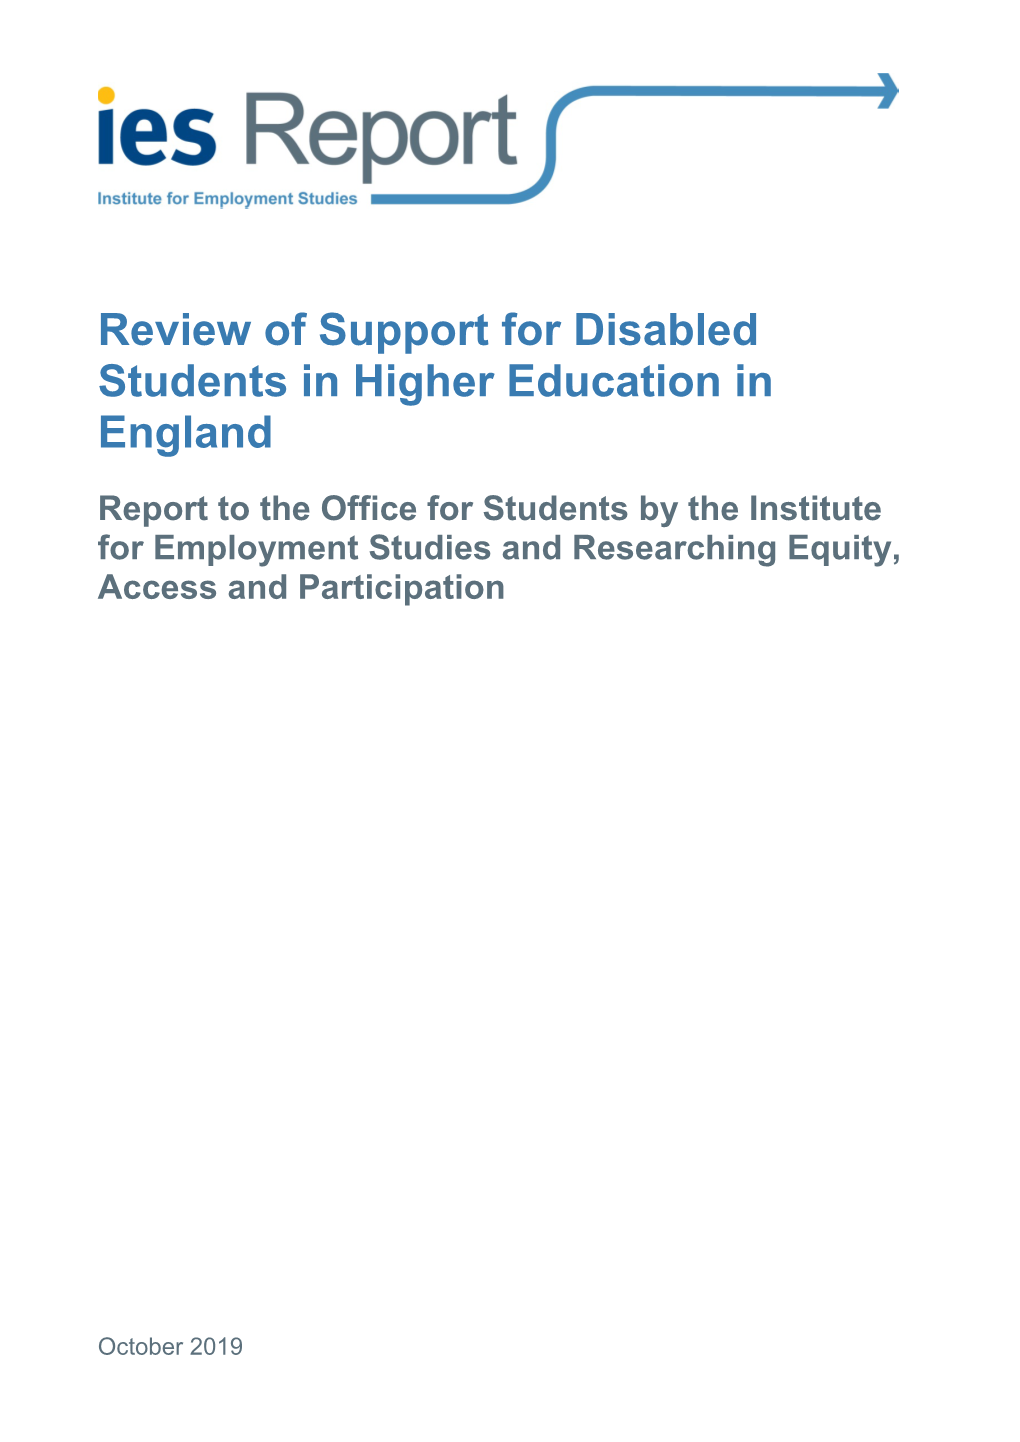 Review of Support for Disabled Students in Higher Education in England